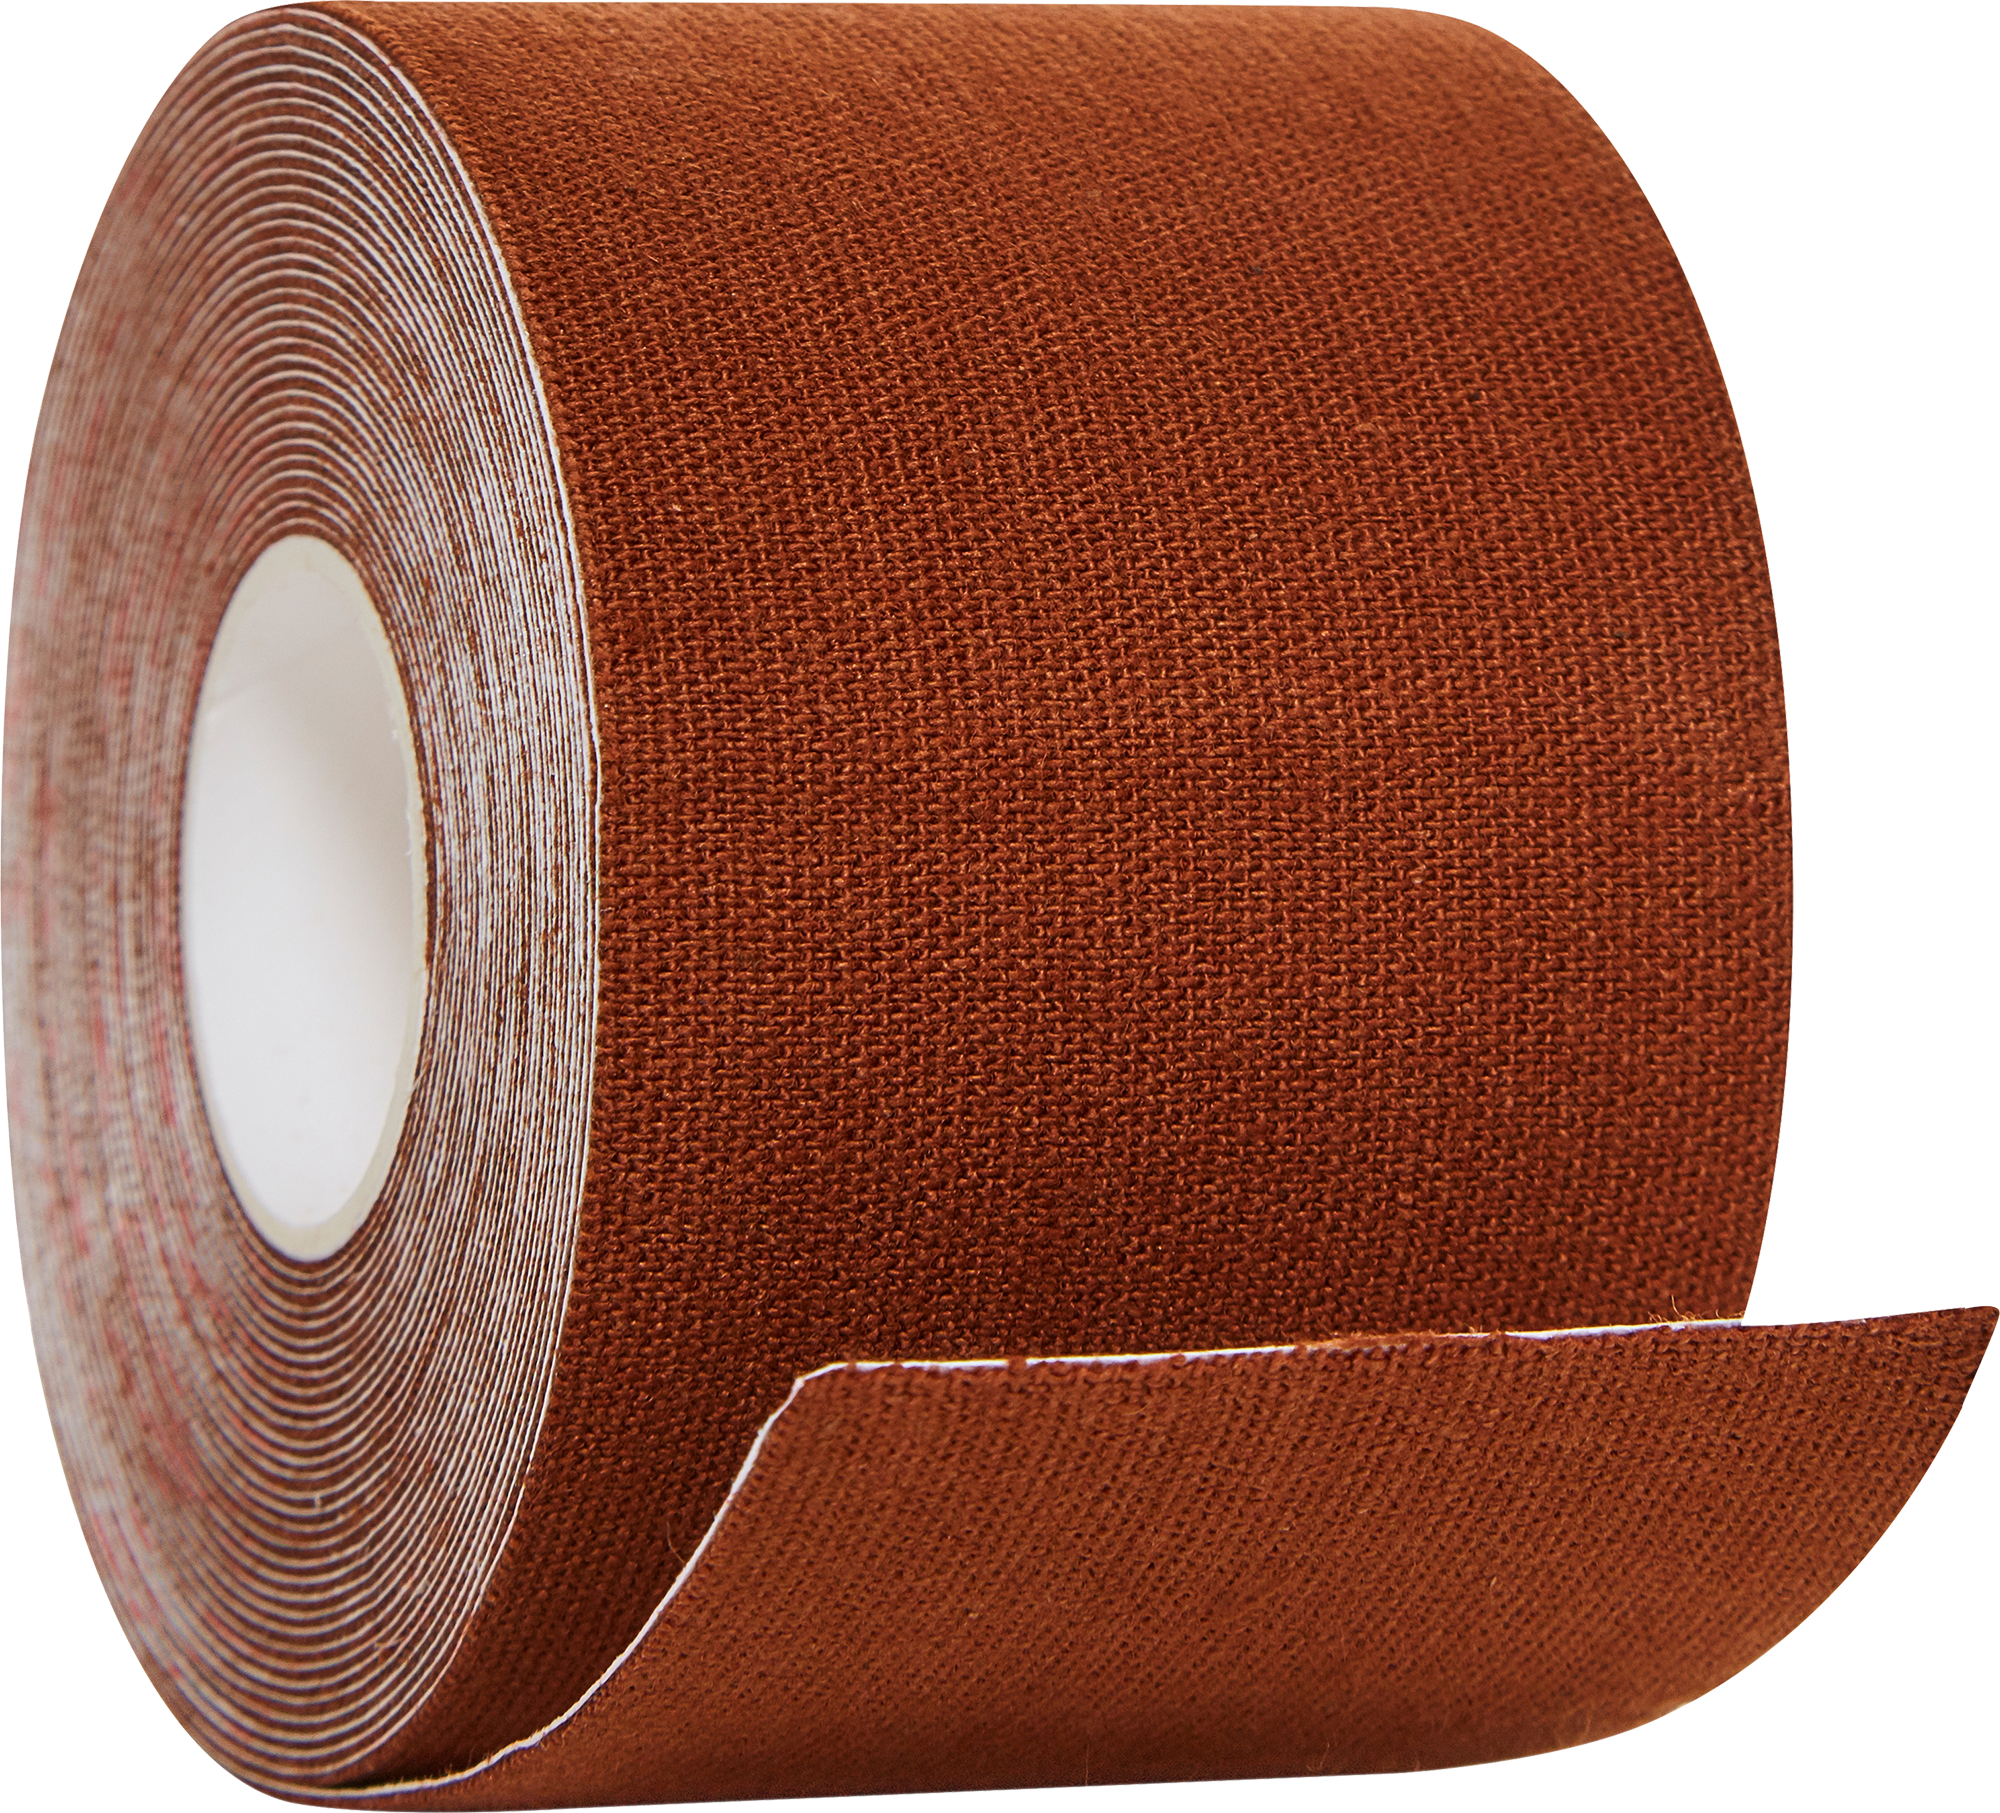 BOOBY TAPE BROWN